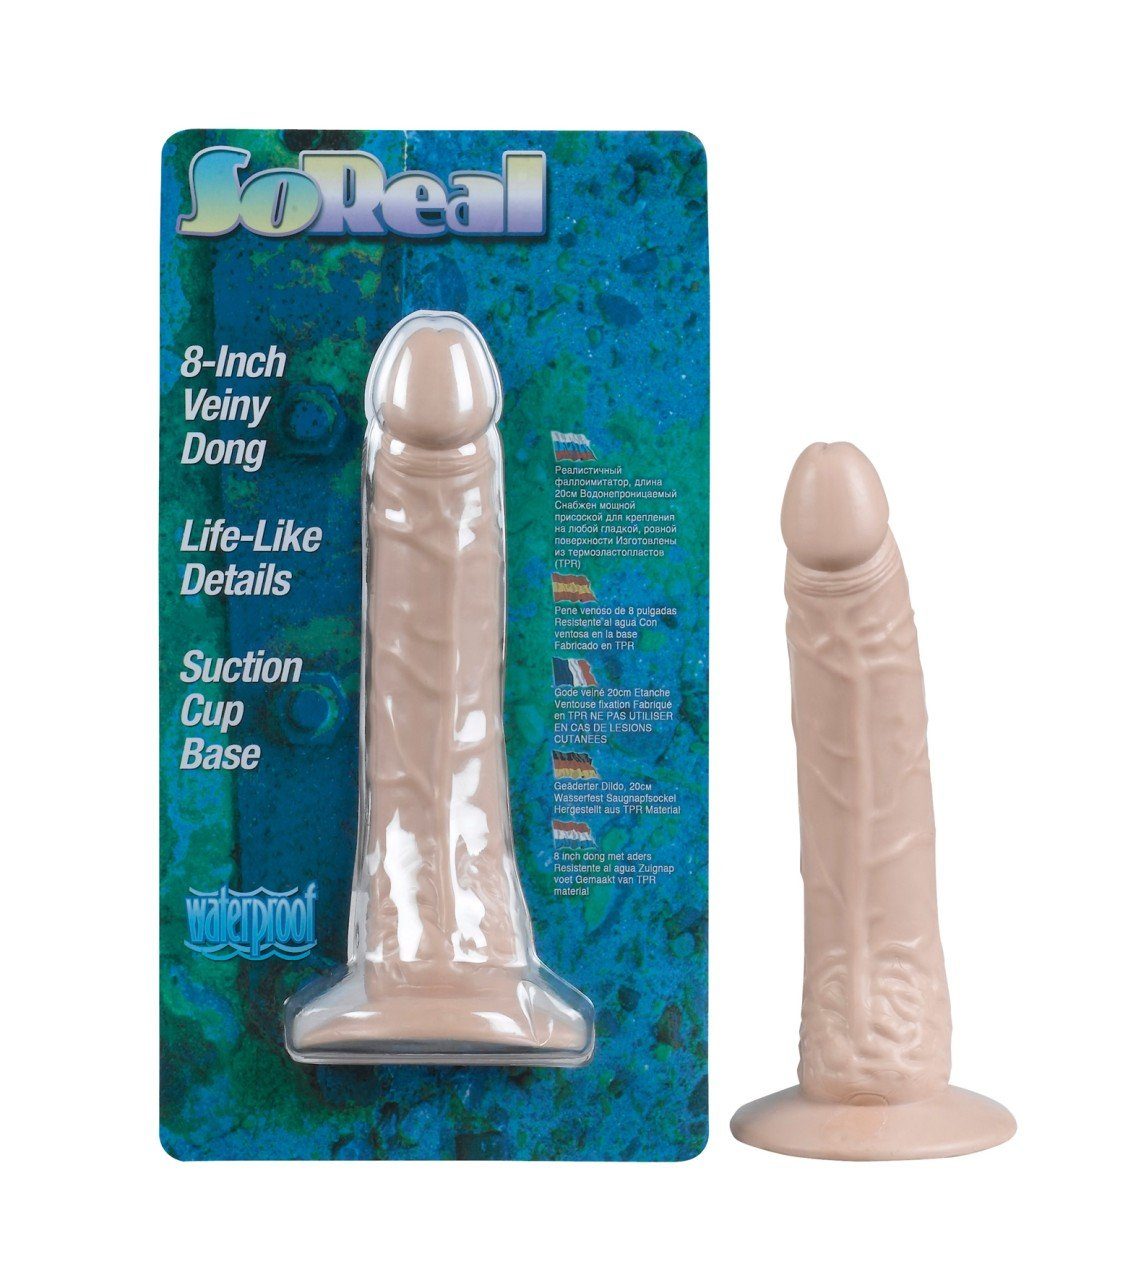 Seven Creations Dildo SO REAL Veiny Dong with Suction Cup - (L,XL), Toys für Alle,Dildos,Seven Creations,Dildos Natürliche Form,Import-S